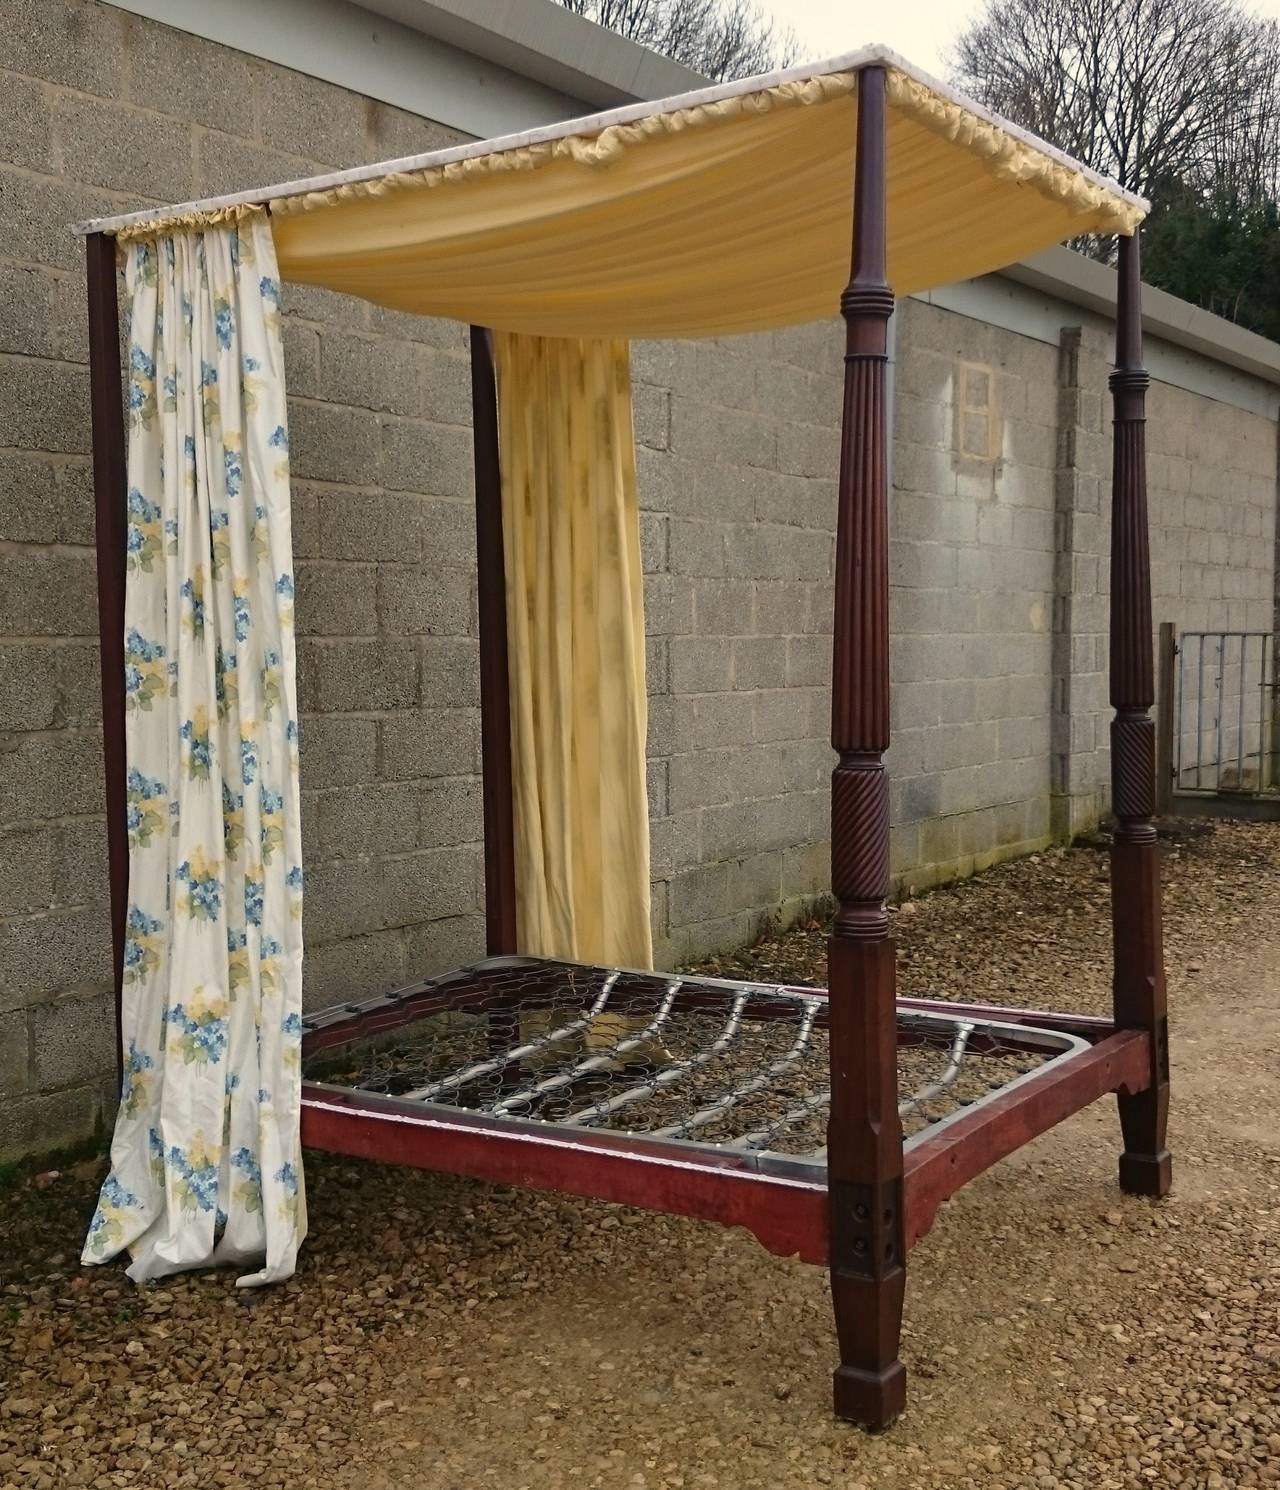 Antique four poster bed with turned front columns made of really splendid Cuban mahogany. The front posts are also reeded and have rope twist which was popular following the British naval victories at the start of the 19th century. Can be made